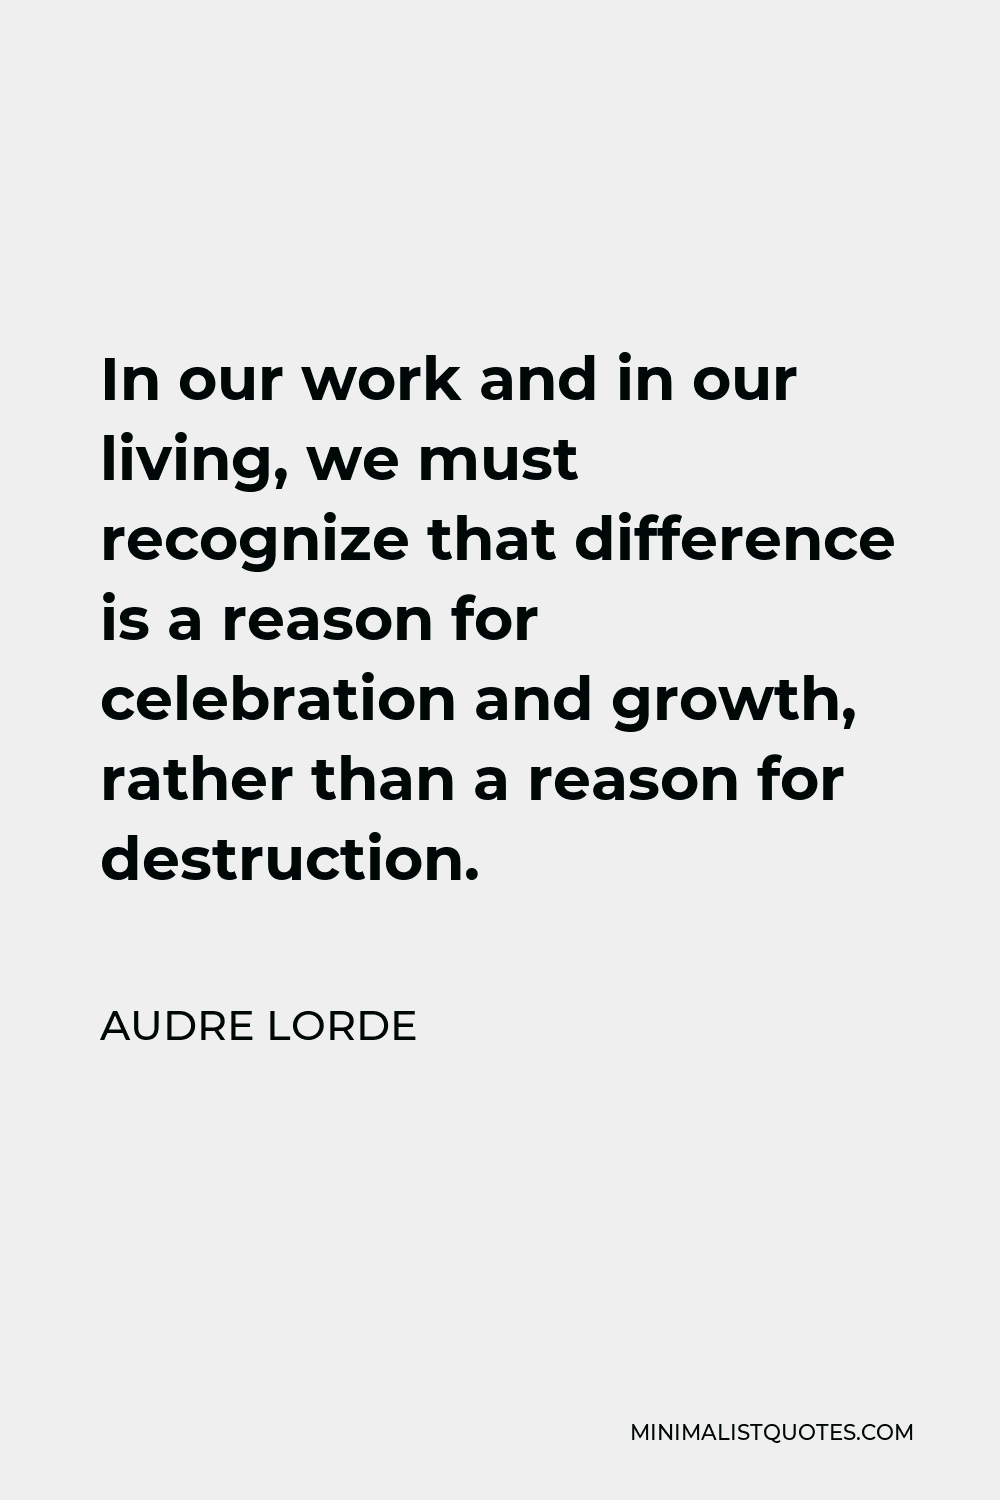 Audre Lorde Quote - In our work and in our living, we must recognize that difference is a reason for celebration and growth, rather than a reason for destruction.